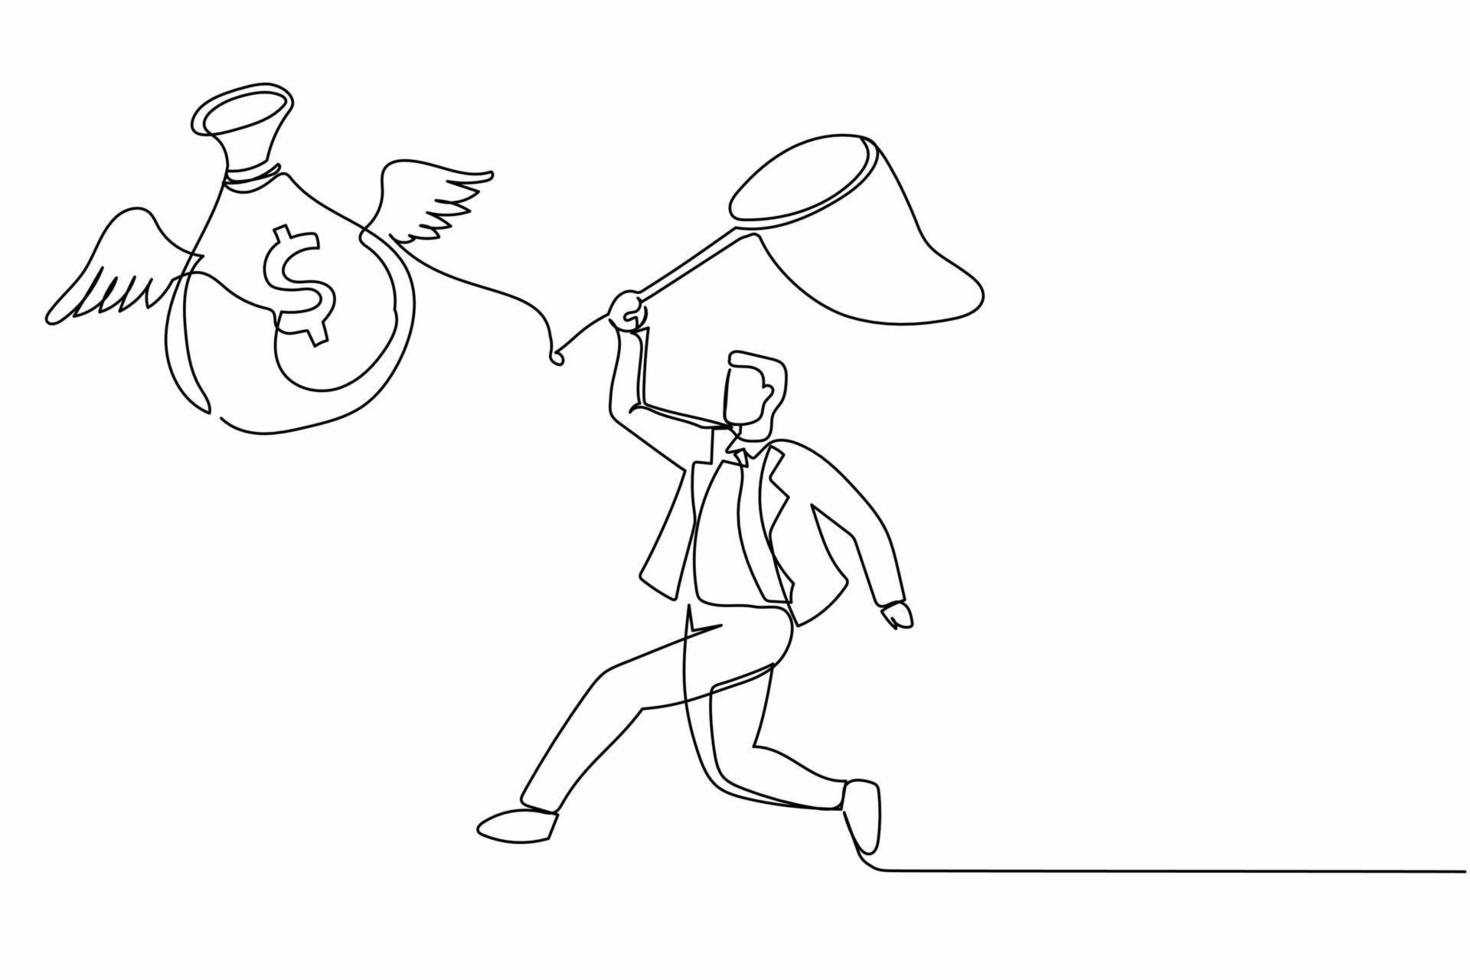 Single one line drawing businessman try to catching flying money bag with butterfly net. Achieving goals, profits, money. Striving for success. Continuous line draw design vector graphic illustration